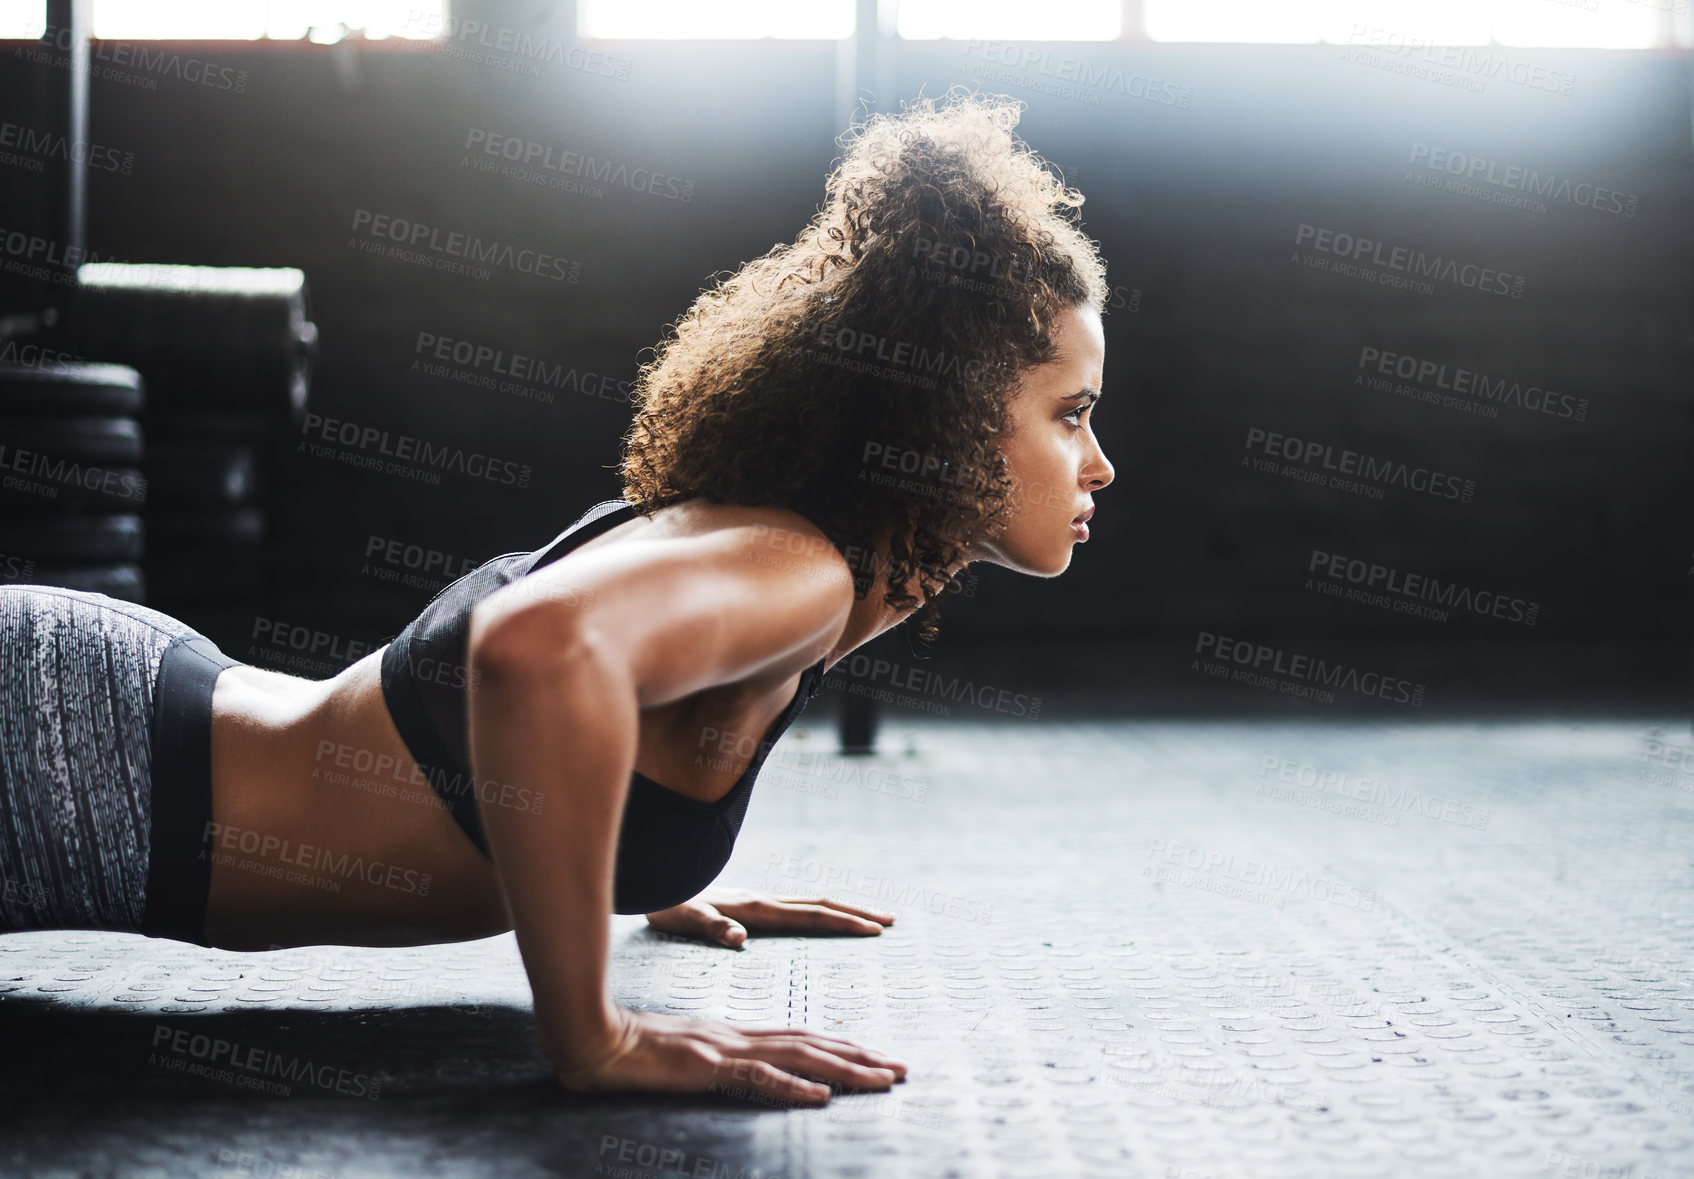 Buy stock photo Shot of a young woman doing pushups in a gym